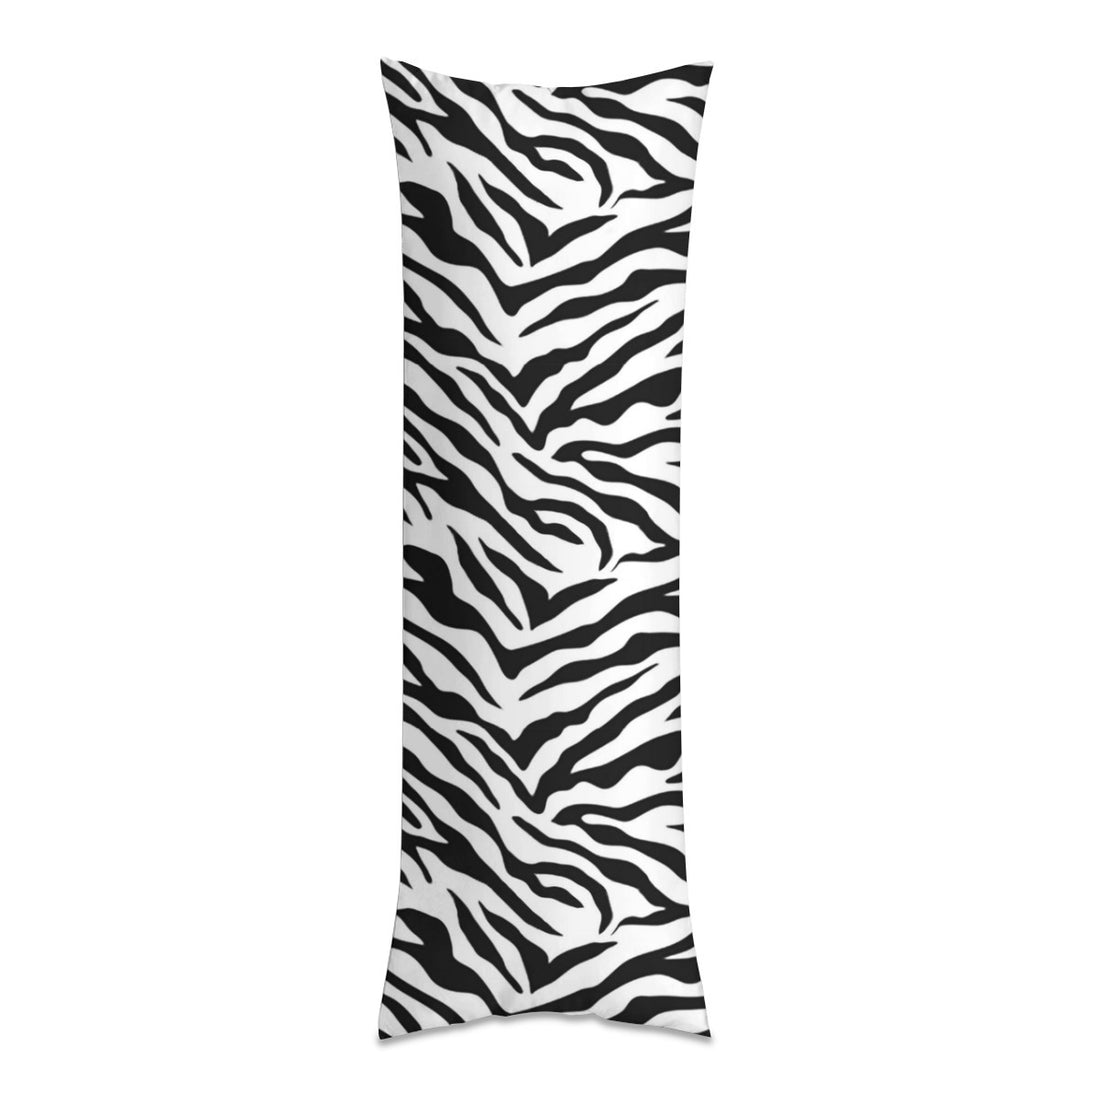 Long Pillow Cover zebra decoration Home-clothes-jewelry